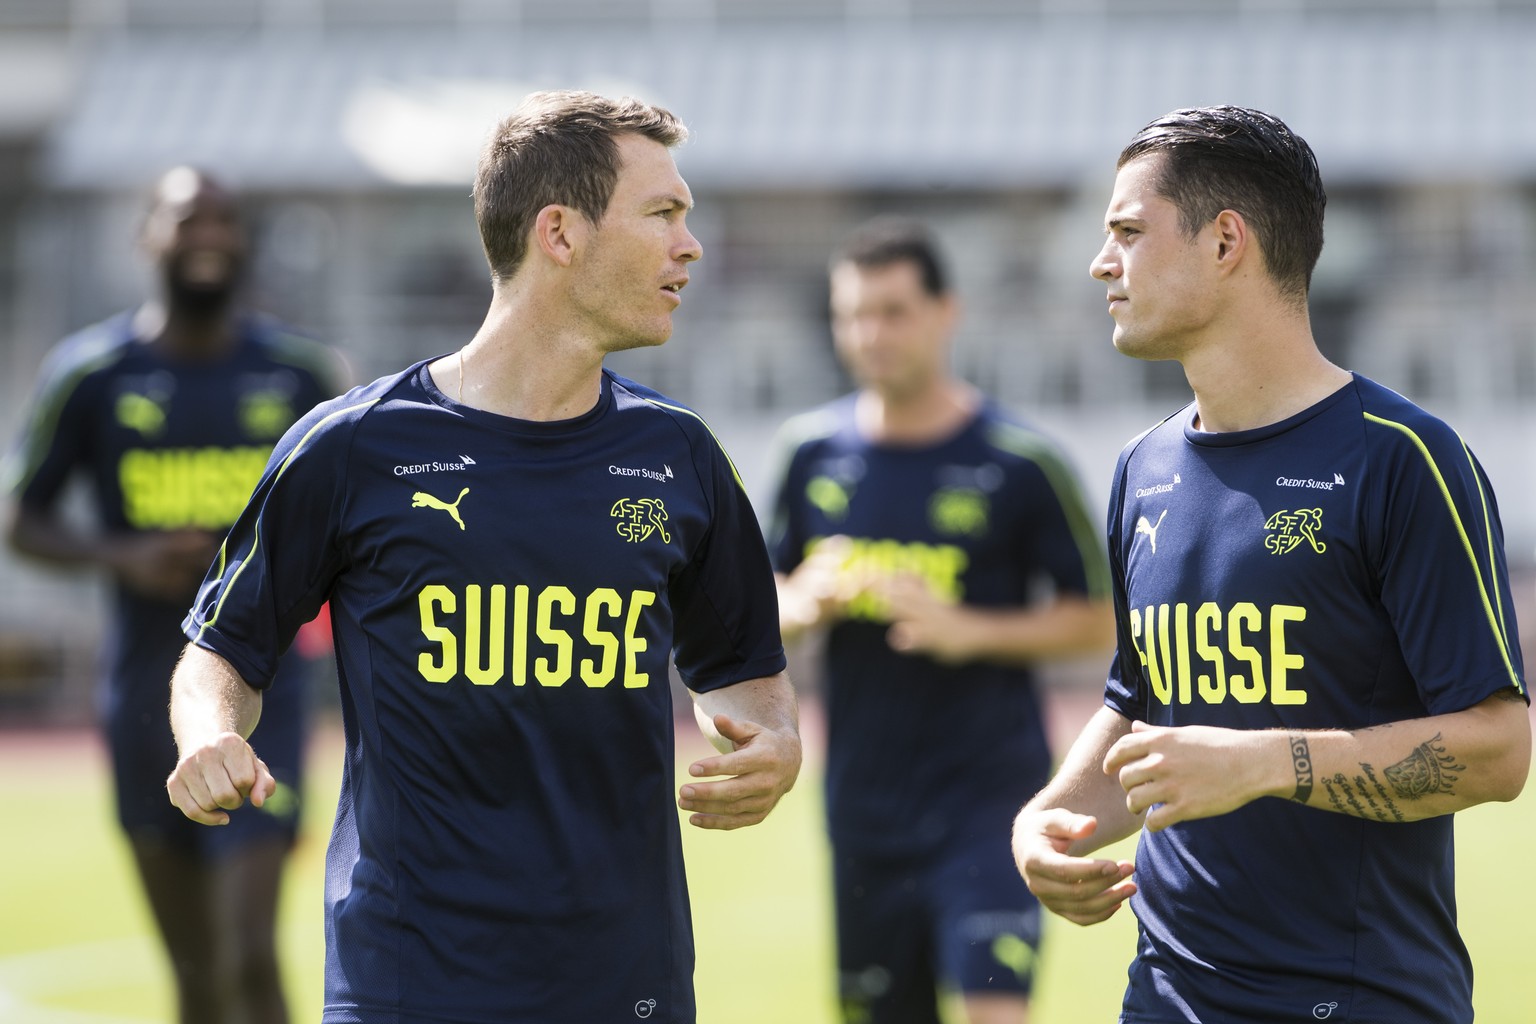 Swiss national team players Stephan Lichtsteiner, left, and Granit Xhaka, right, during a training session in Lugano, Switzerland, Thursday, June 7, 2018. (KEYSTONE/Ti-Press/Alessandro Crinari)